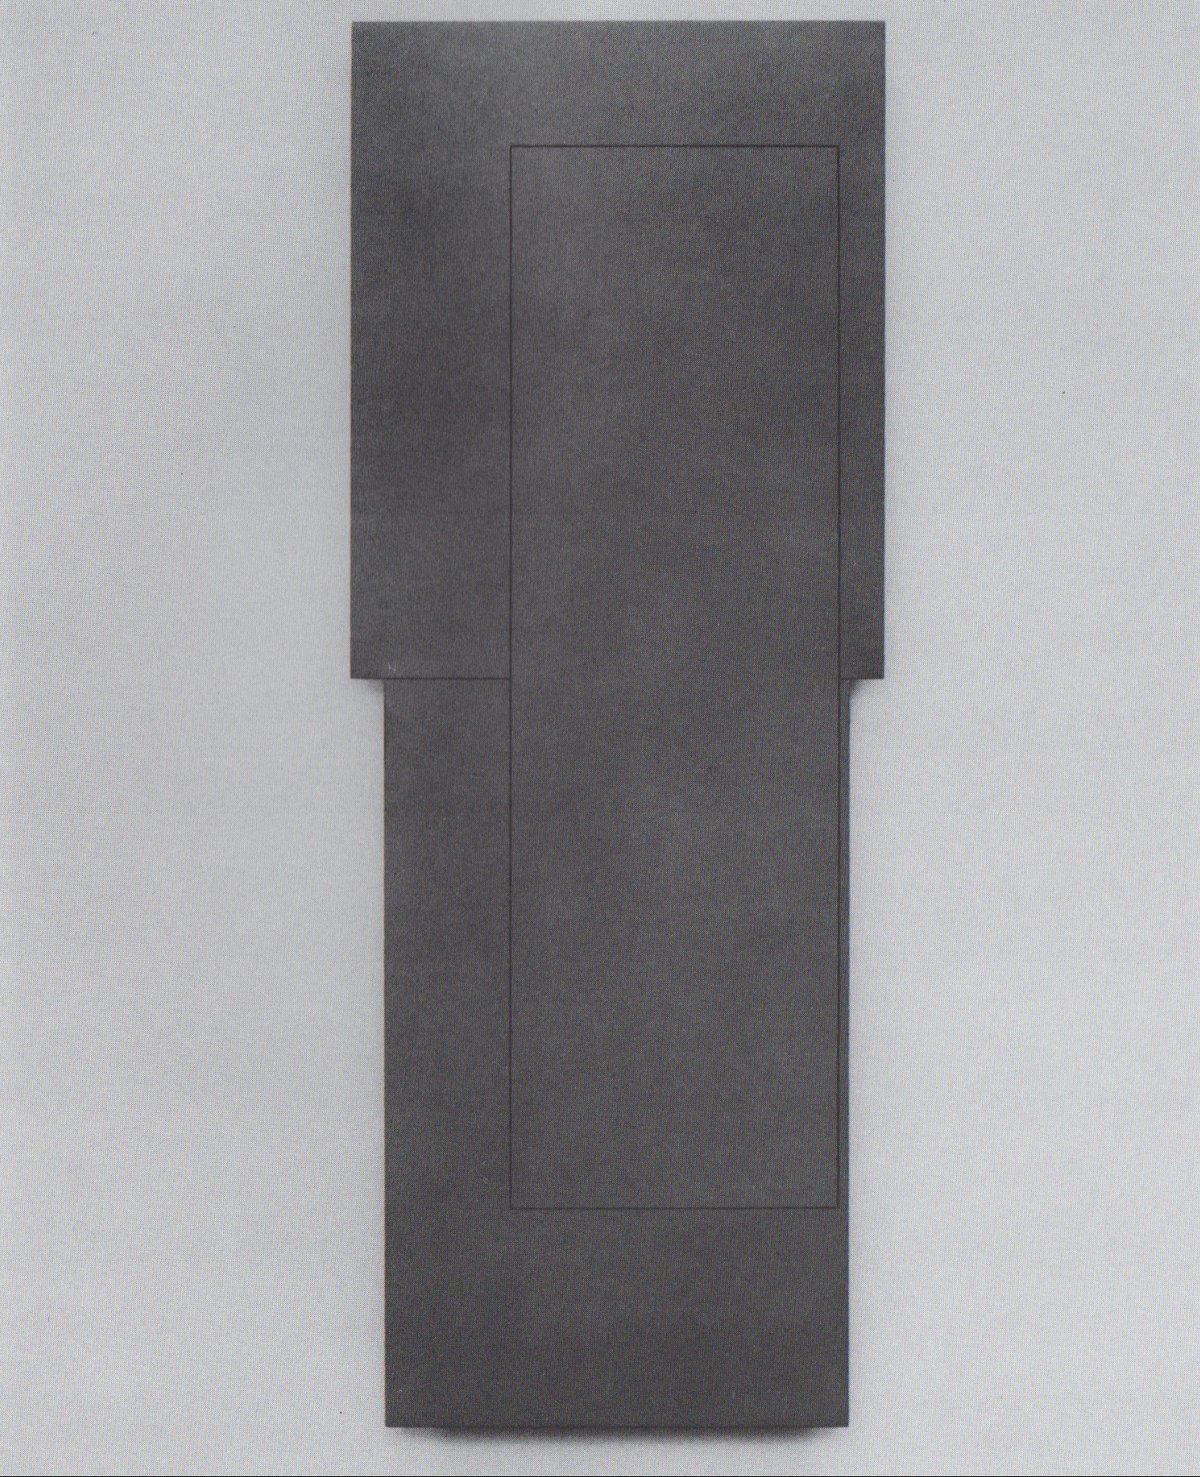 (fig. 2) &quot;assembly of rectangles I&quot; (1981/81), oil on plywood, 159 x 60 cm